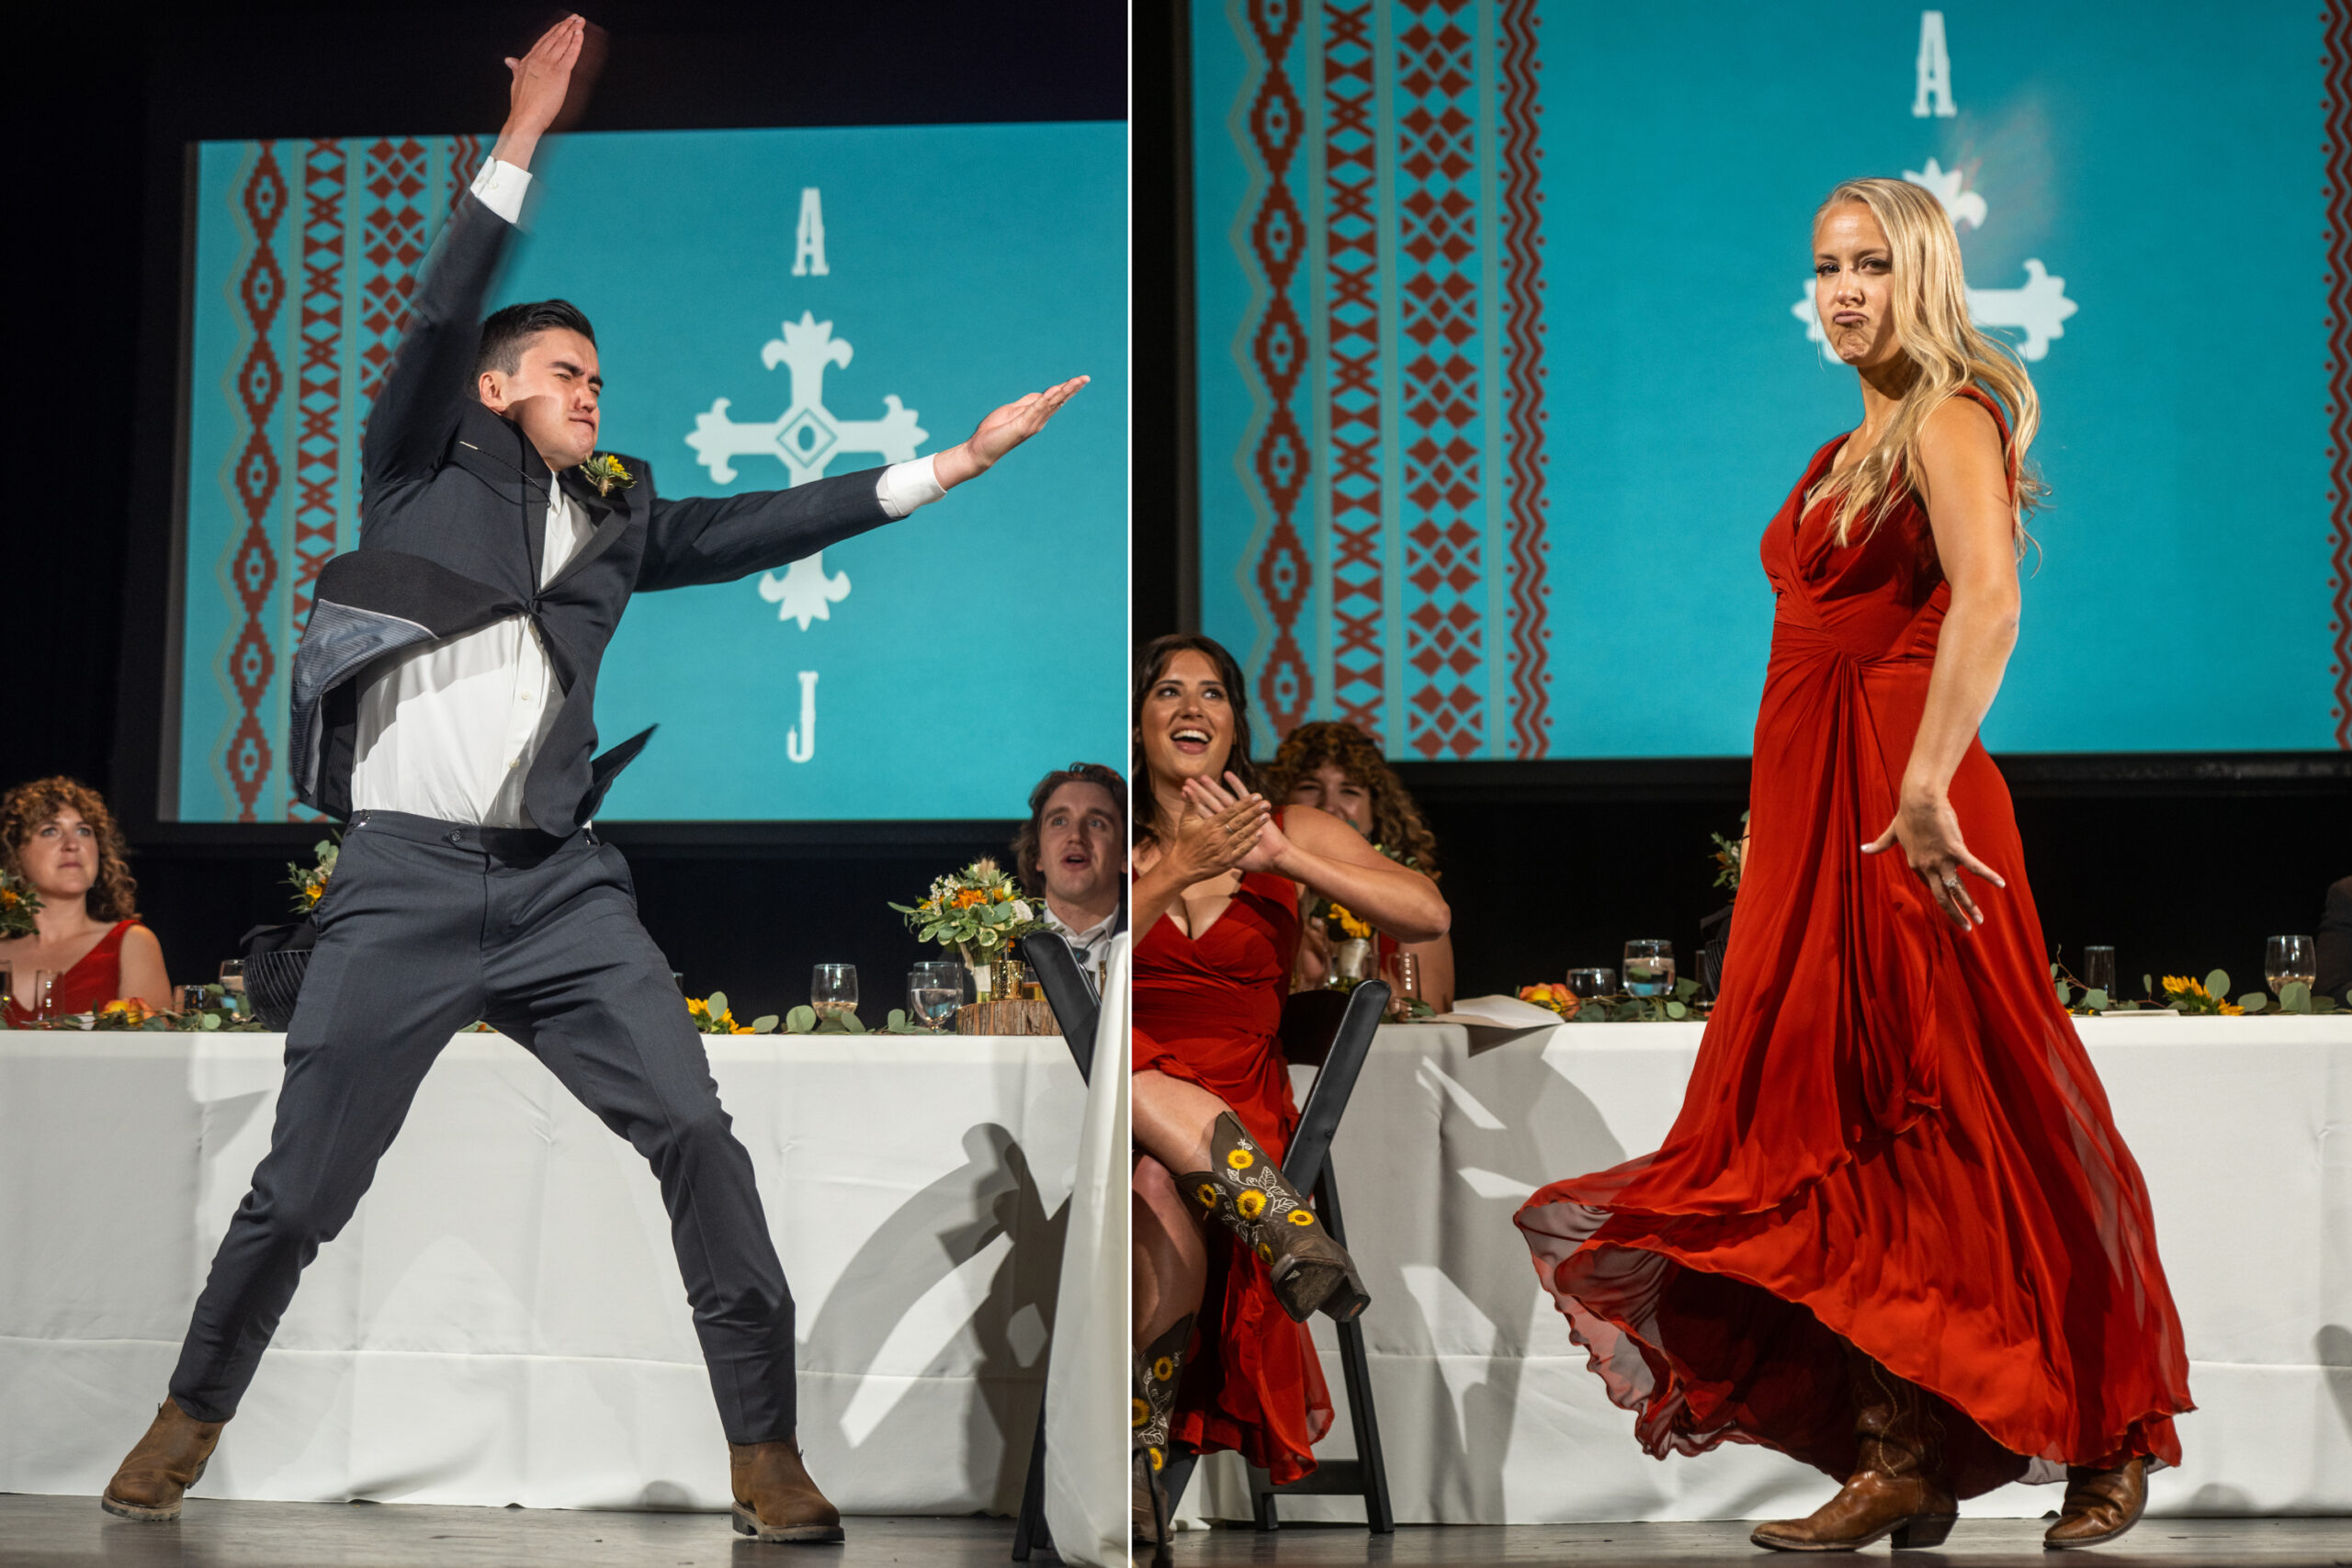 A groomsman, left, and a bridesmaid, right, dance solo on stage during a wedding reception at the Rose Event Center in Golden, Colorado.